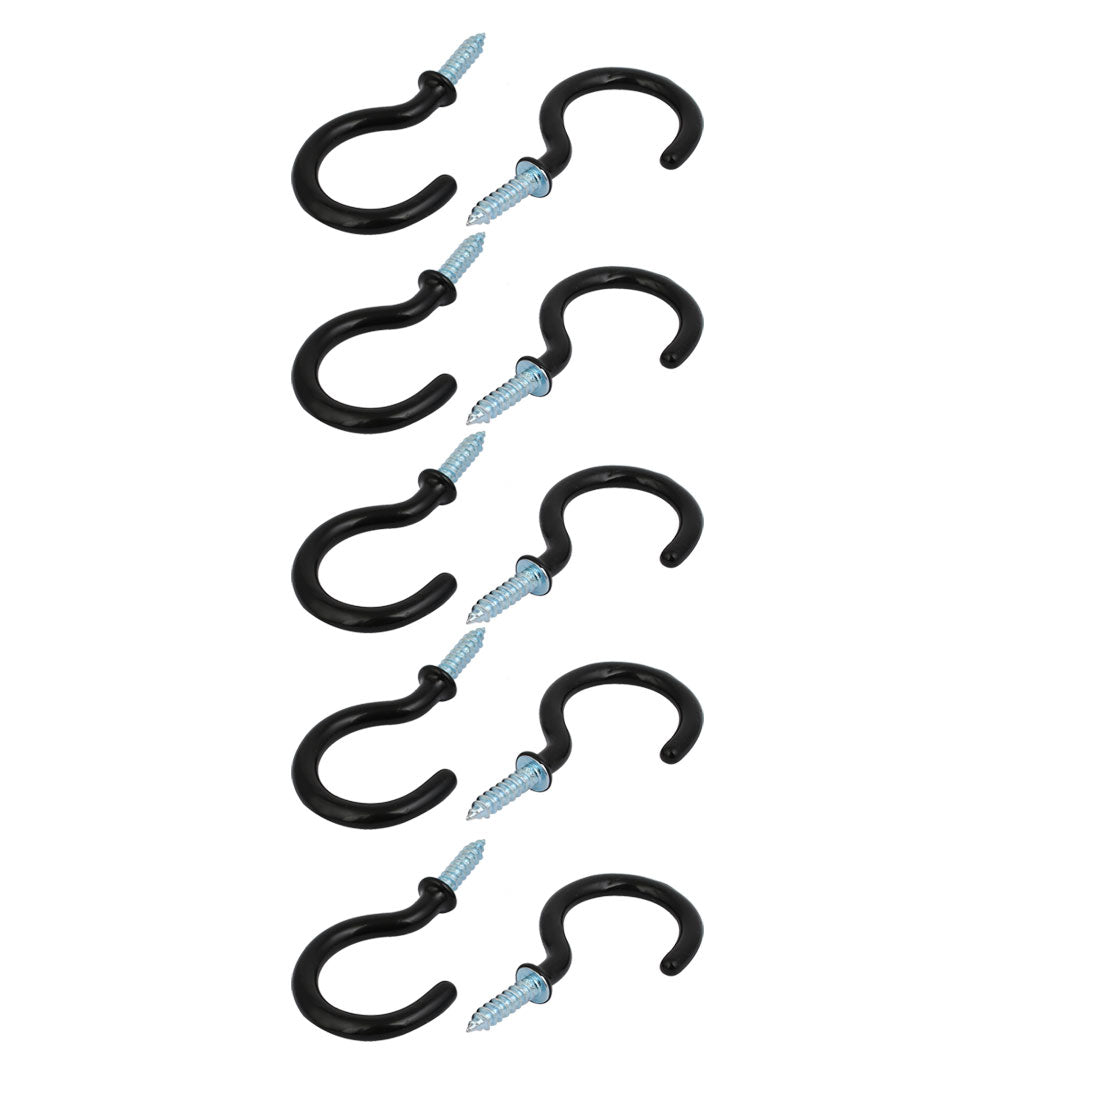 uxcell Uxcell 1-1/2 Inch Plastic Coated Screw-in Open Cup Ceiling Hooks Hangers Black 10pcs